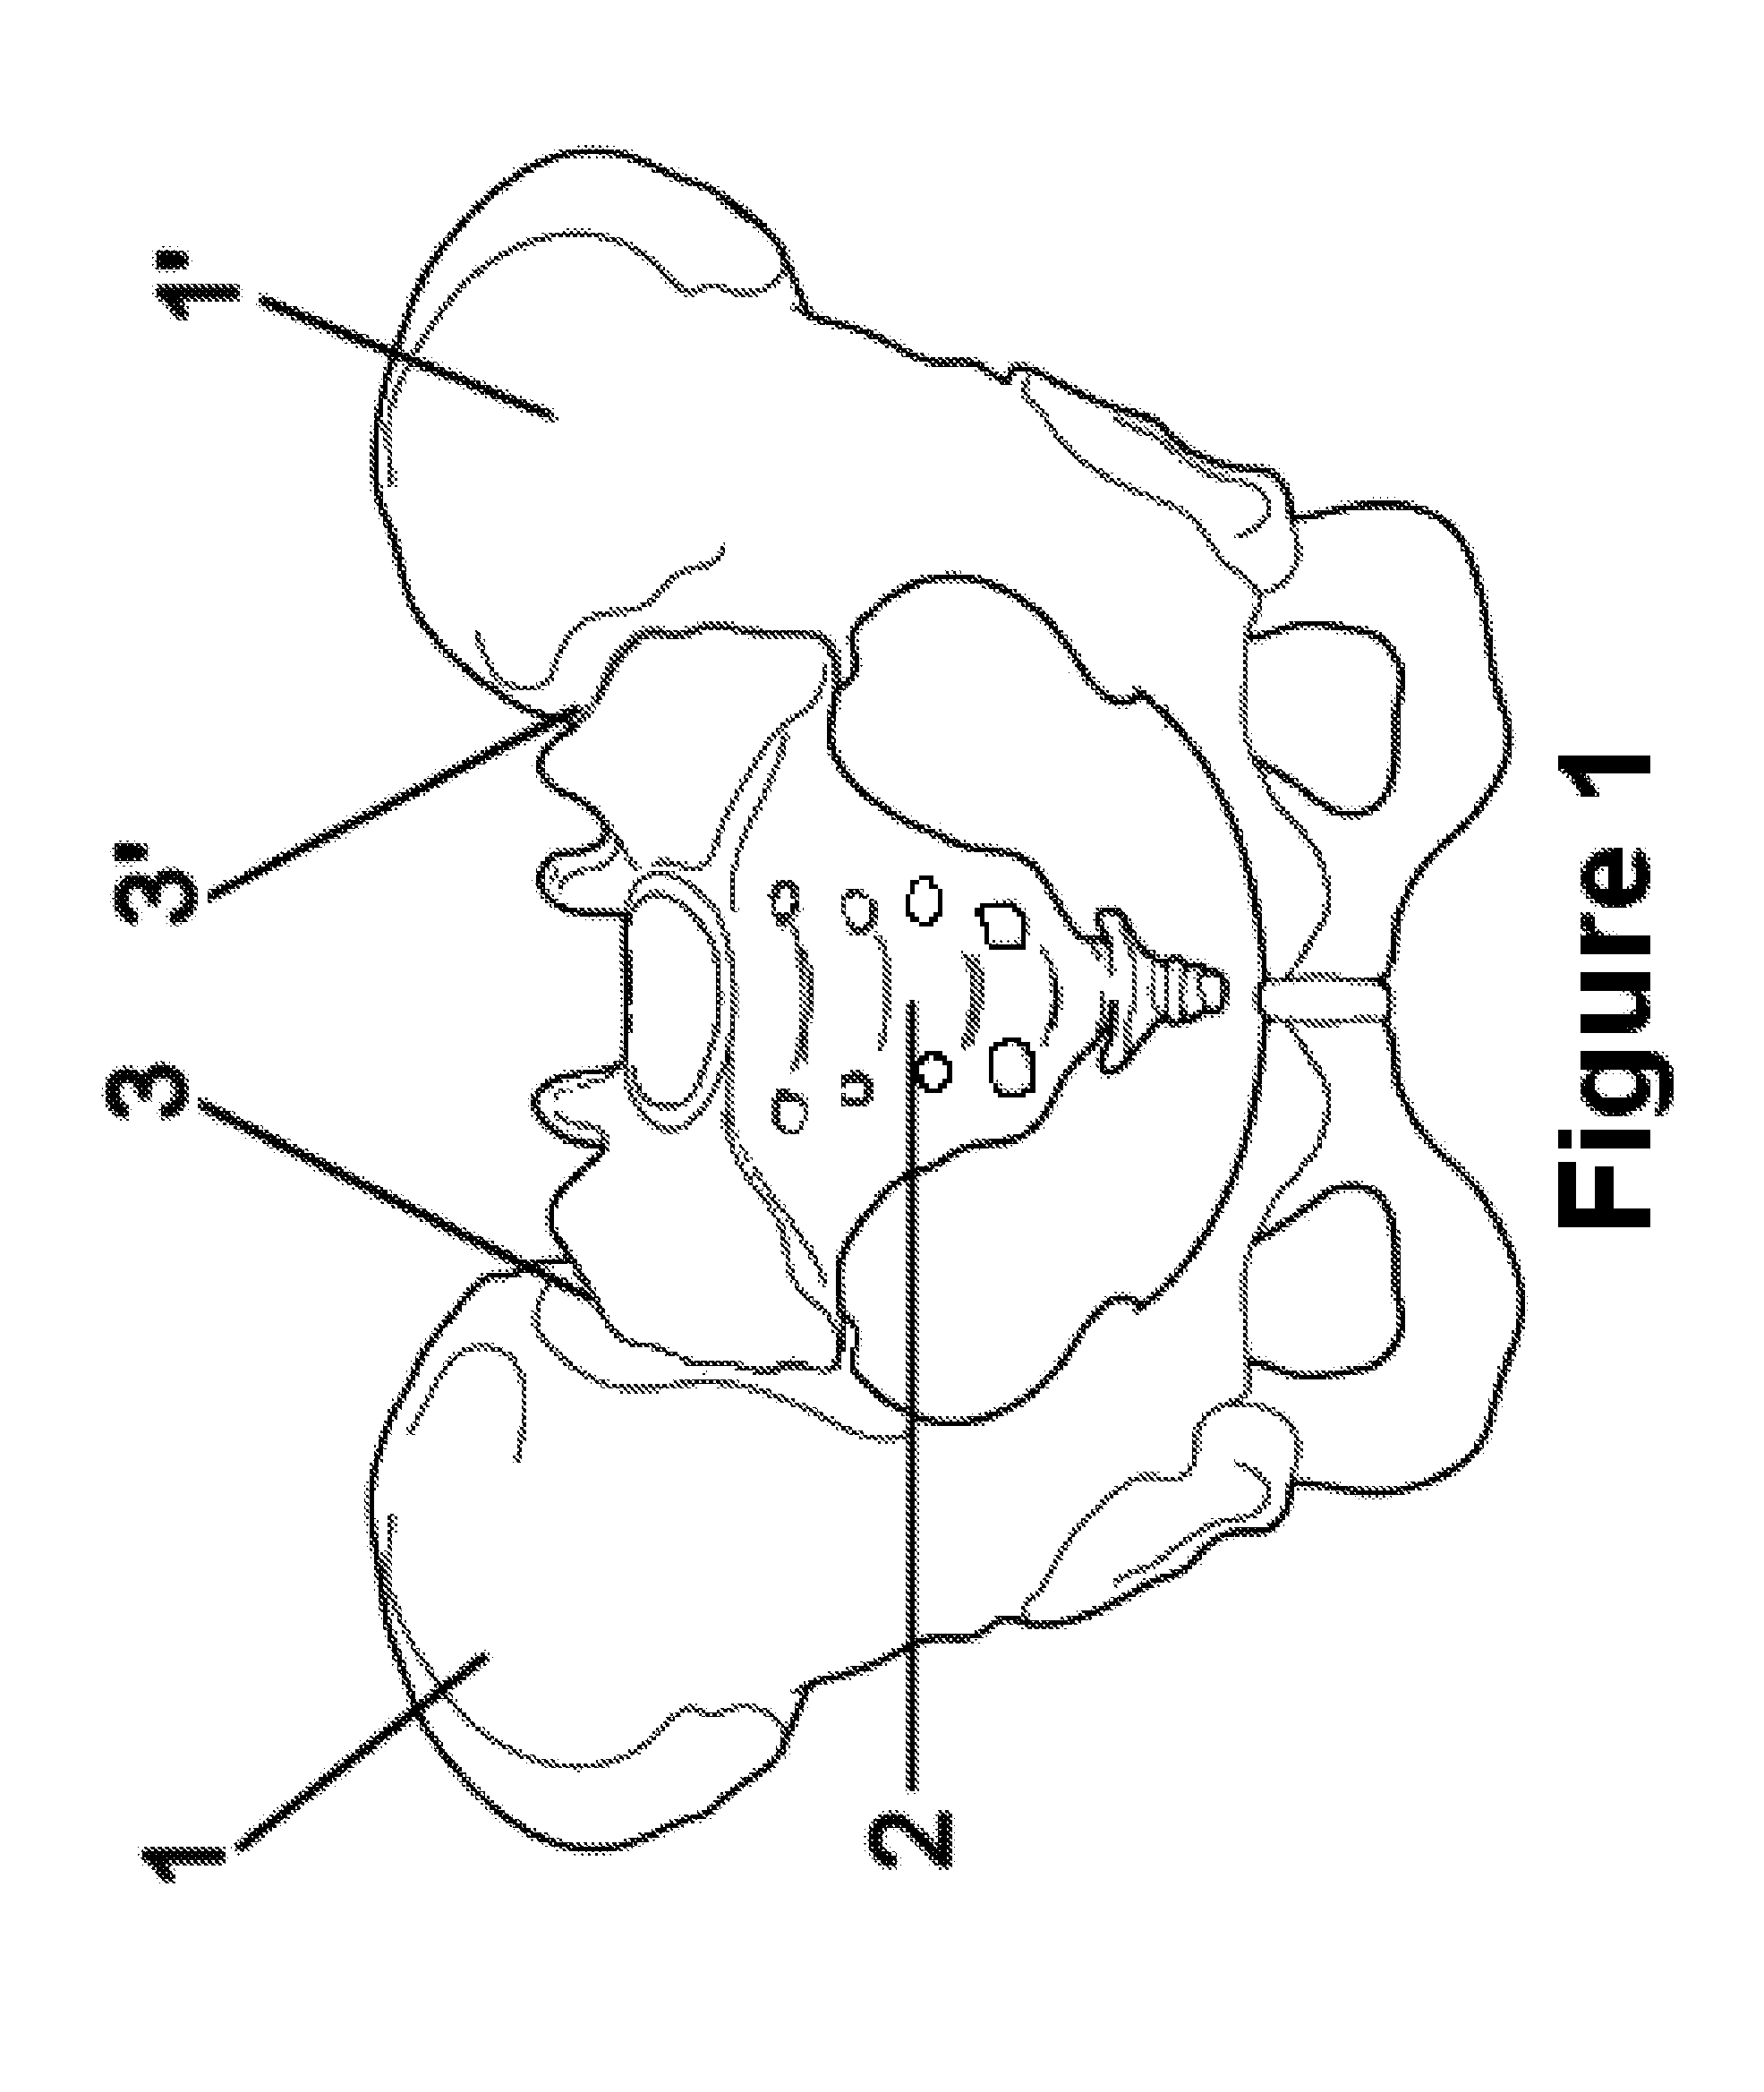 Method for Minimally Invasive Treatment of Unstable Pelvic Ring Injuries with an Internal Posterior Iliosacral Screw and Bone Plate